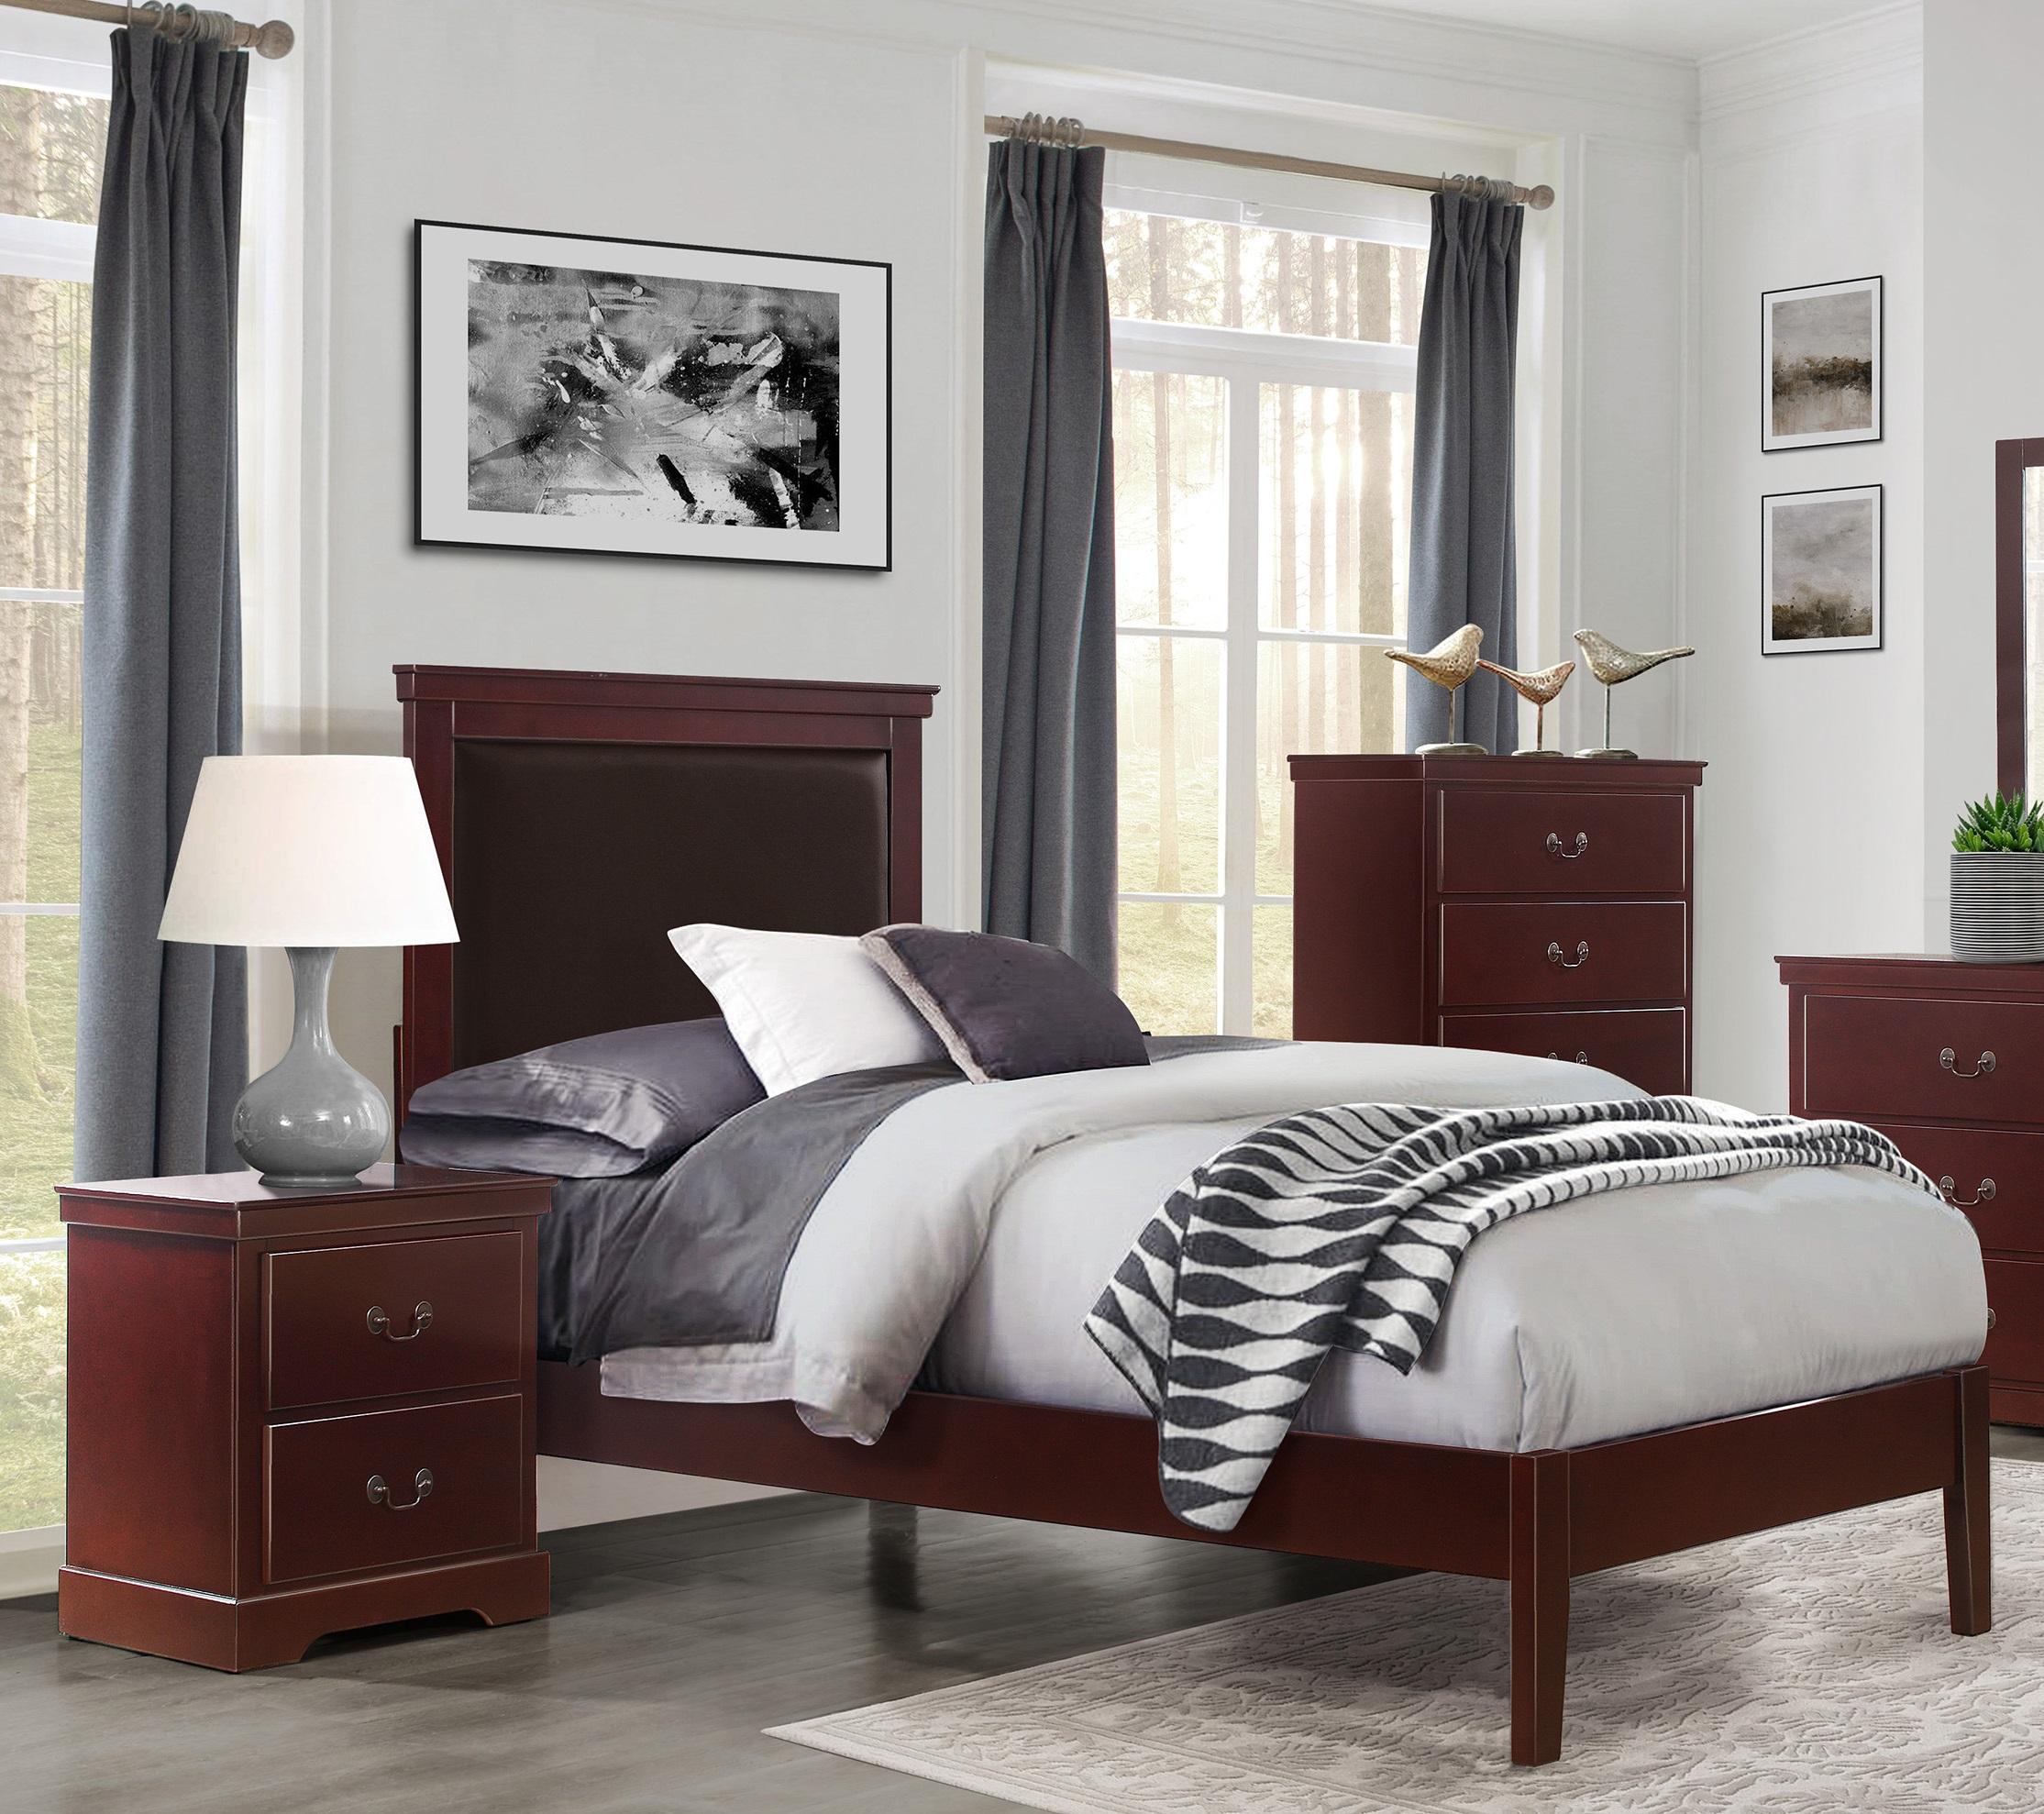 Modern Bedroom Set 1519CHT-1-3PC Seabright 1519CHT-1-3PC in Cherry Faux Leather